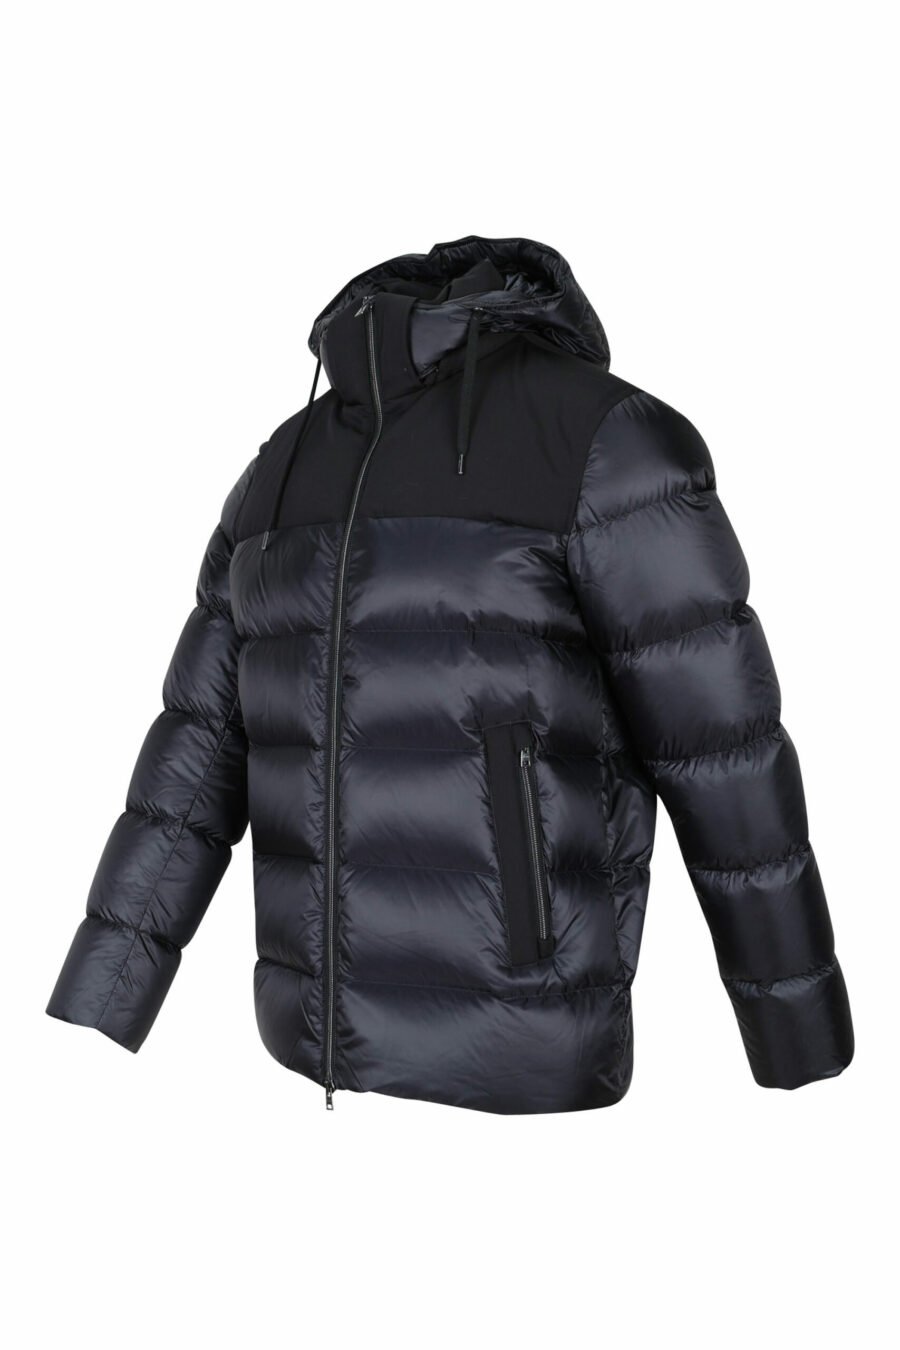 Black mix hooded jacket with hood - 8055721704395 1 scaled